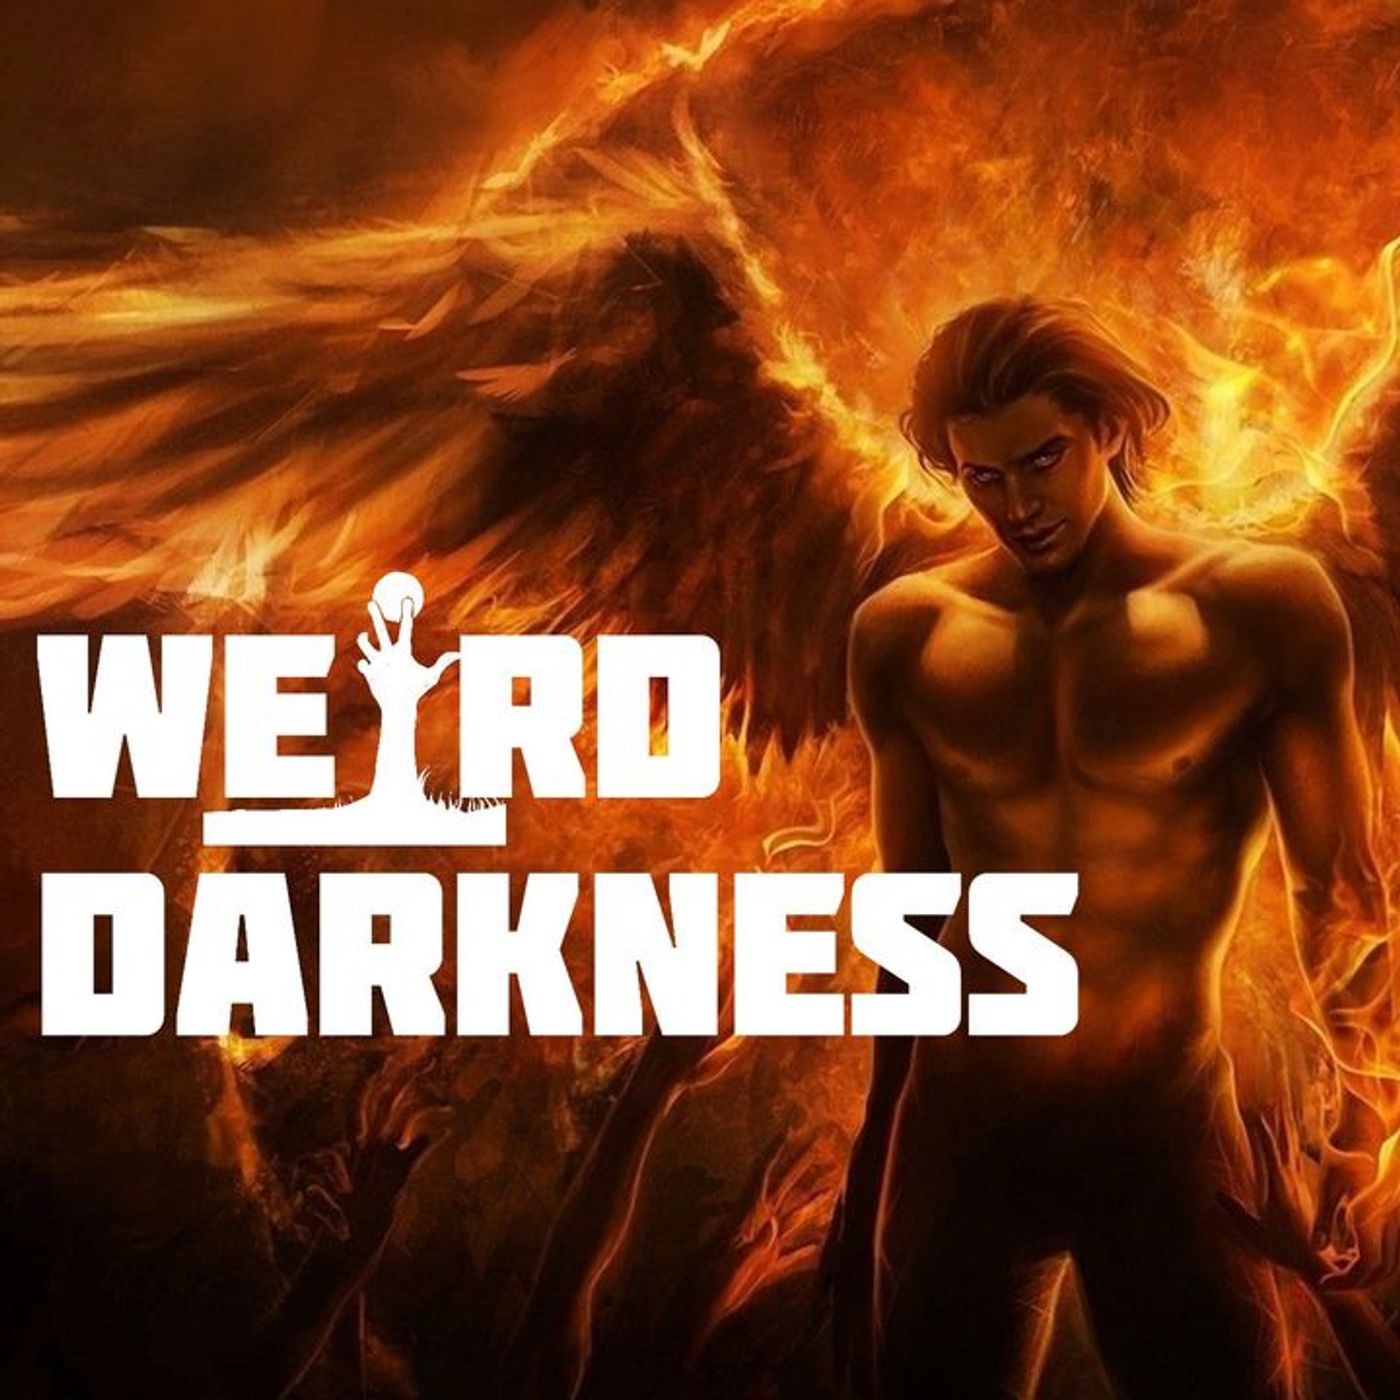 “A VETERAN MAKES A DEAL WITH A DEMON” and More Terrifying Paranormal Stories! #WeirdDarkness